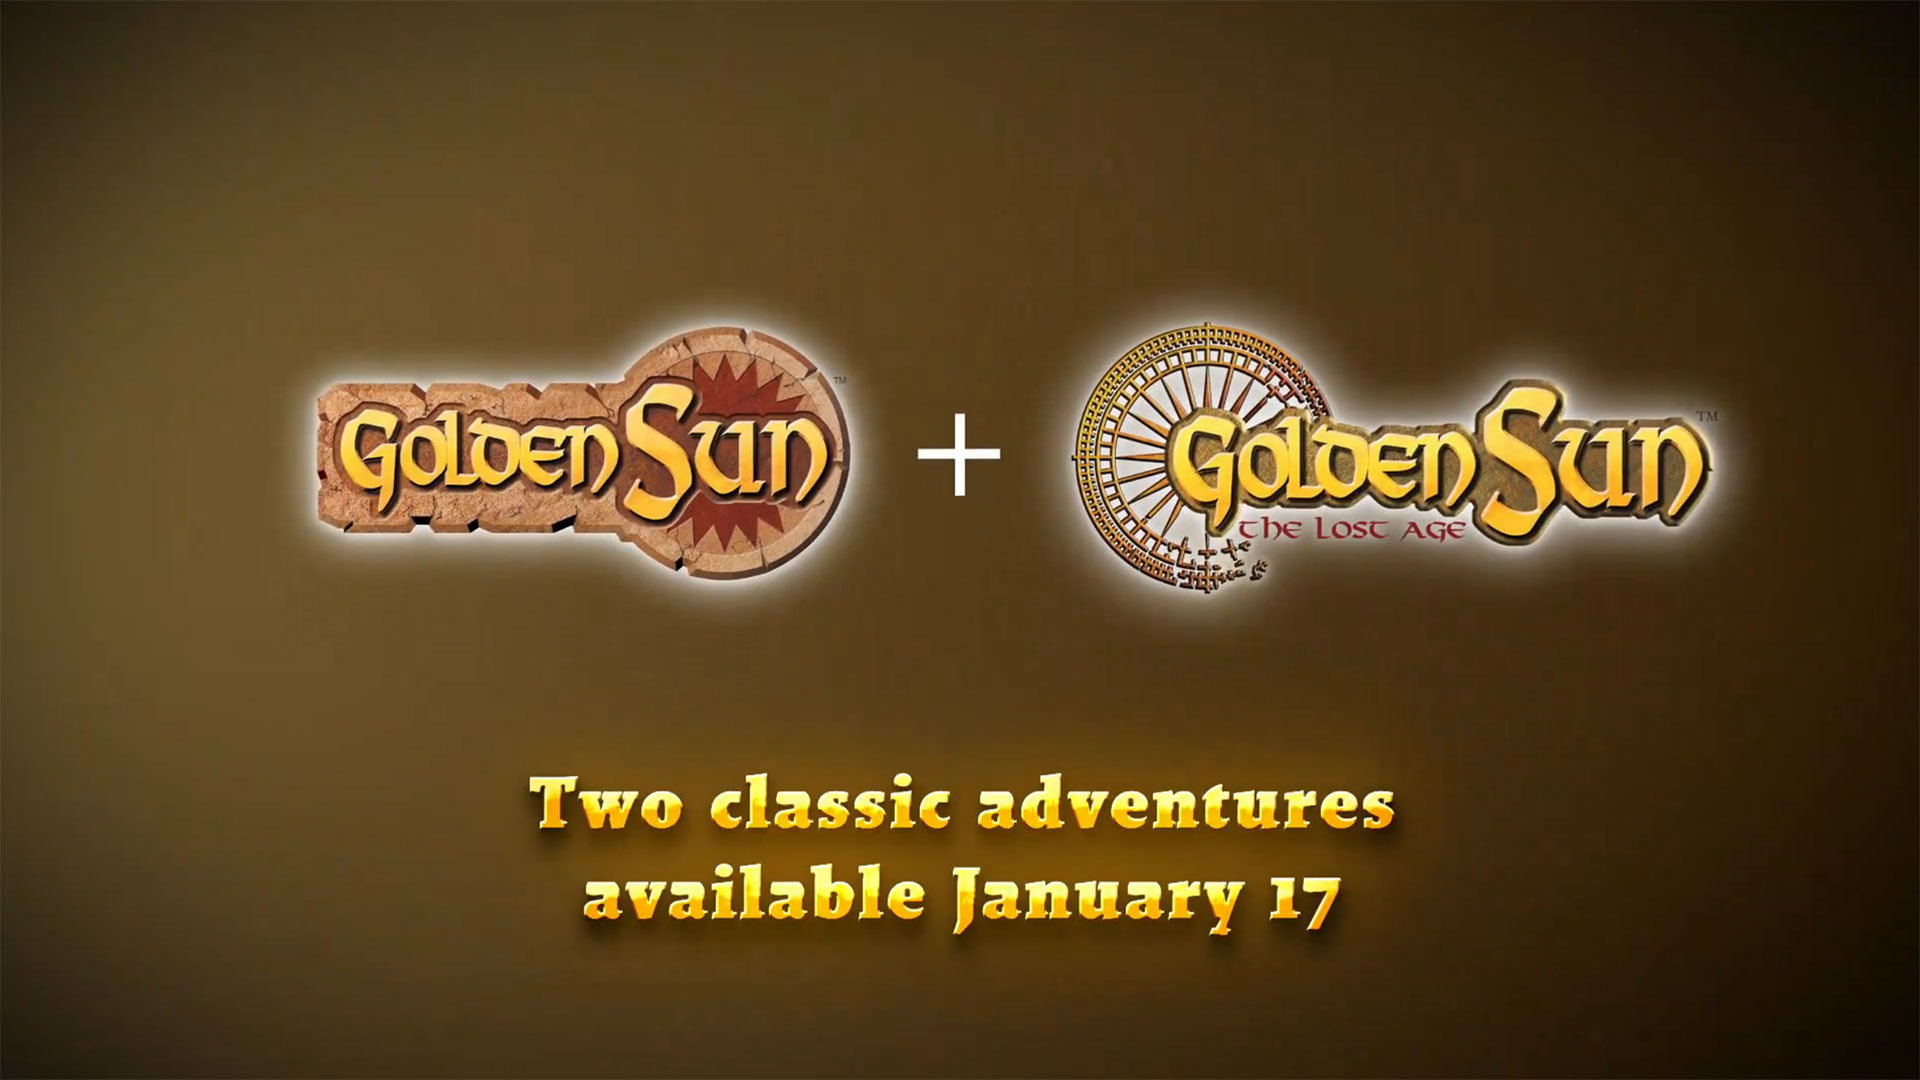 Golden Sun and Golden Sun: The Lost Age will be available to Switch Online + Expansion Pack members on January 17